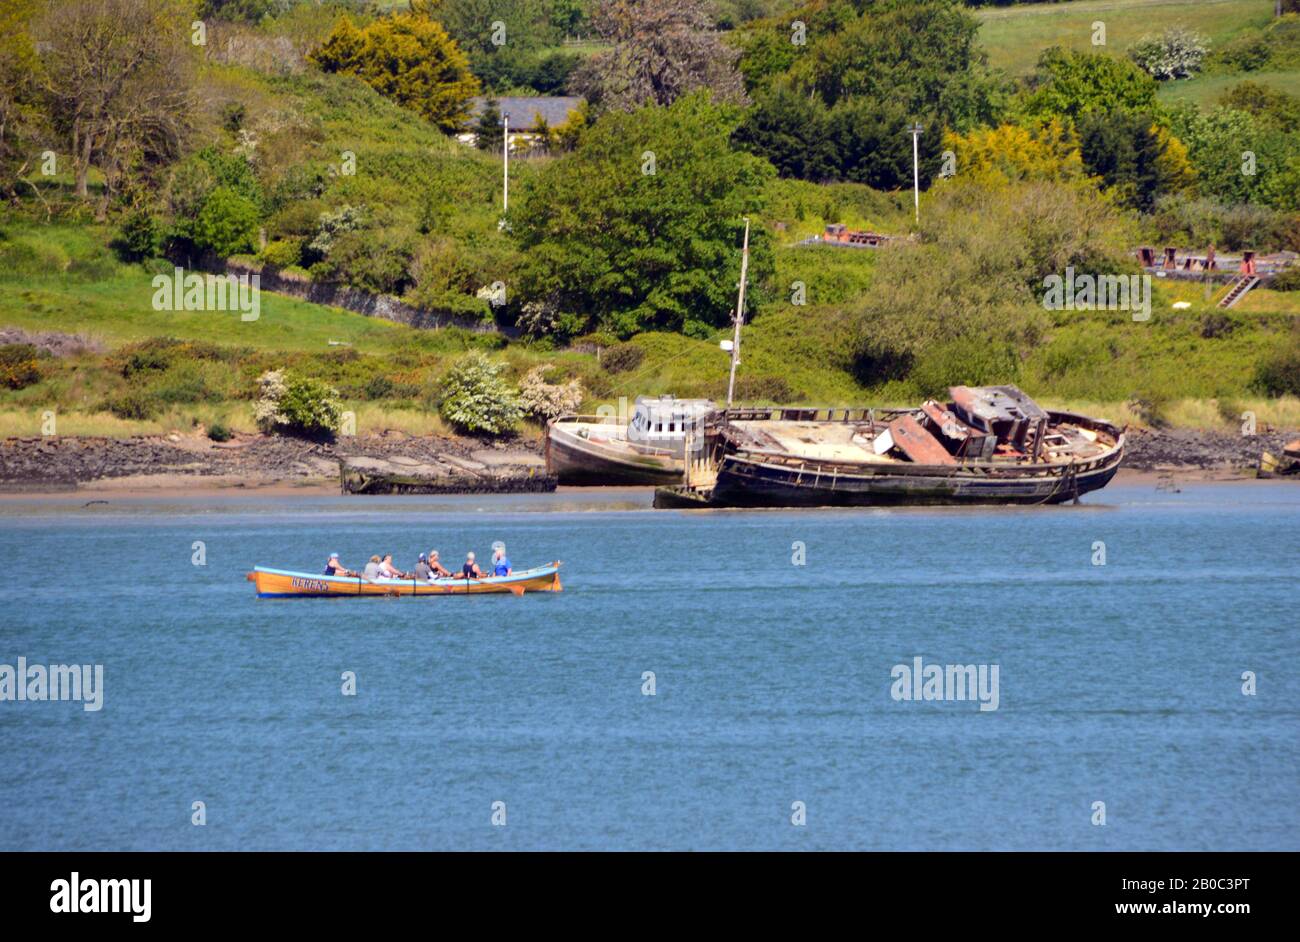 Rowers in Canoe Passing Old Wooden Shipwrecks on Estuary of the River Torridge near Appledore on the Tarka Trail/South West Coast Path, North Devon. Stock Photo